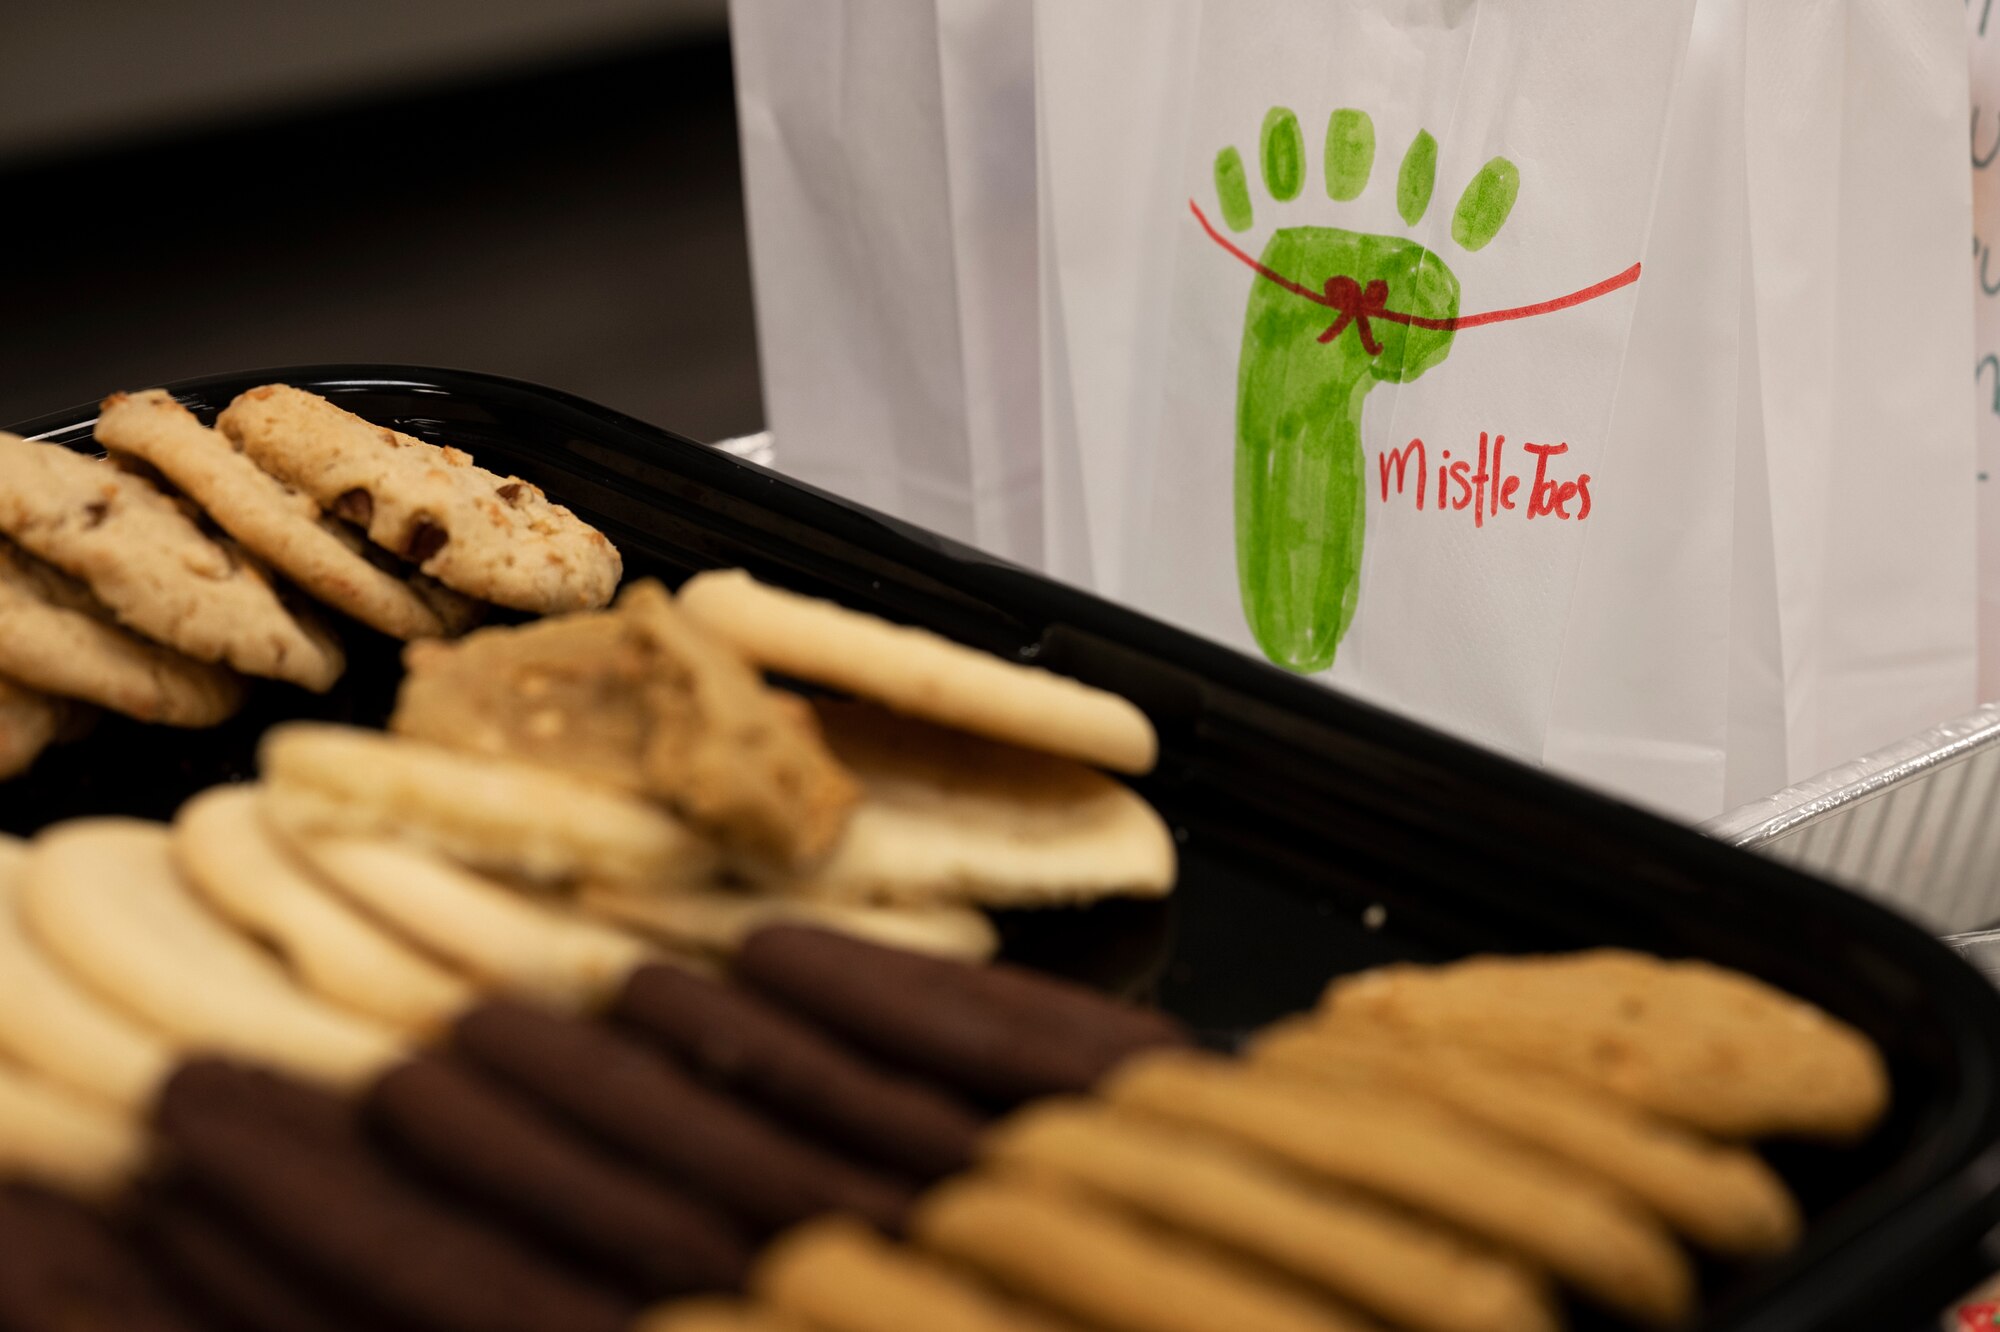 A tray of assorted cookies sits in the foreground of the photo with a white paper bag behind it.